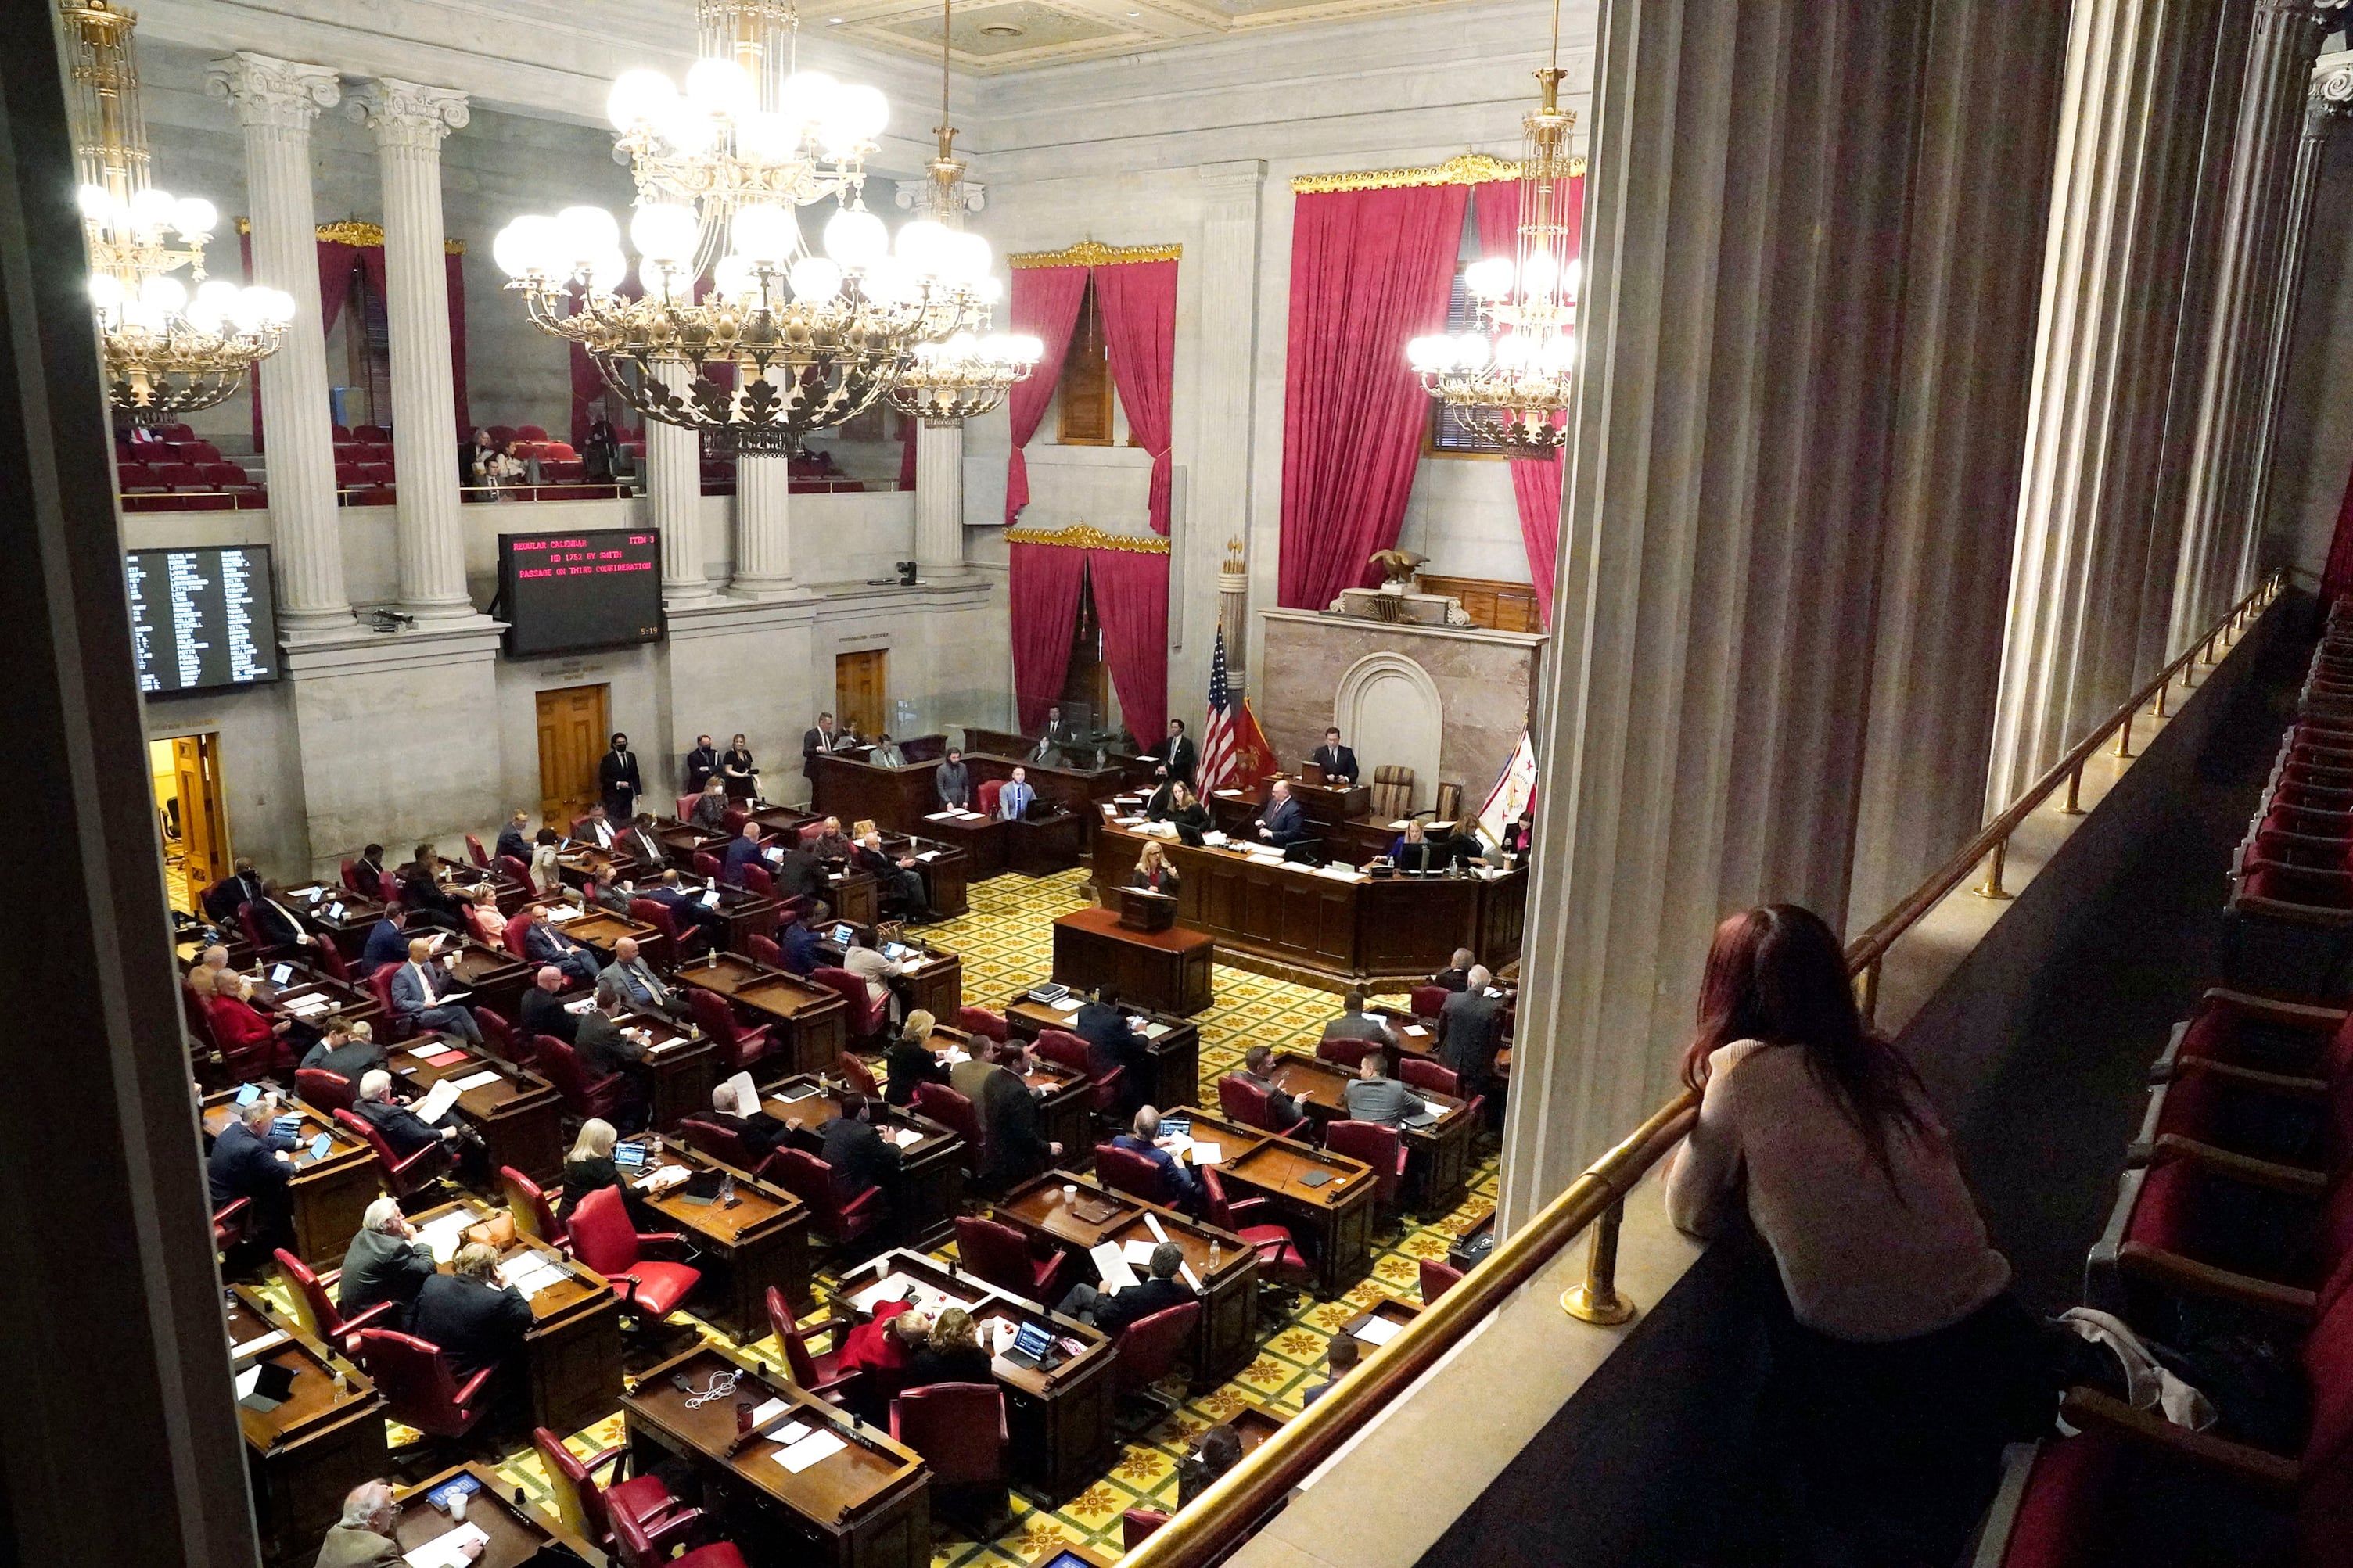 A spectator watches from the balcony as legislators conduct business in large legislative chamber lit by massive chandaliers.